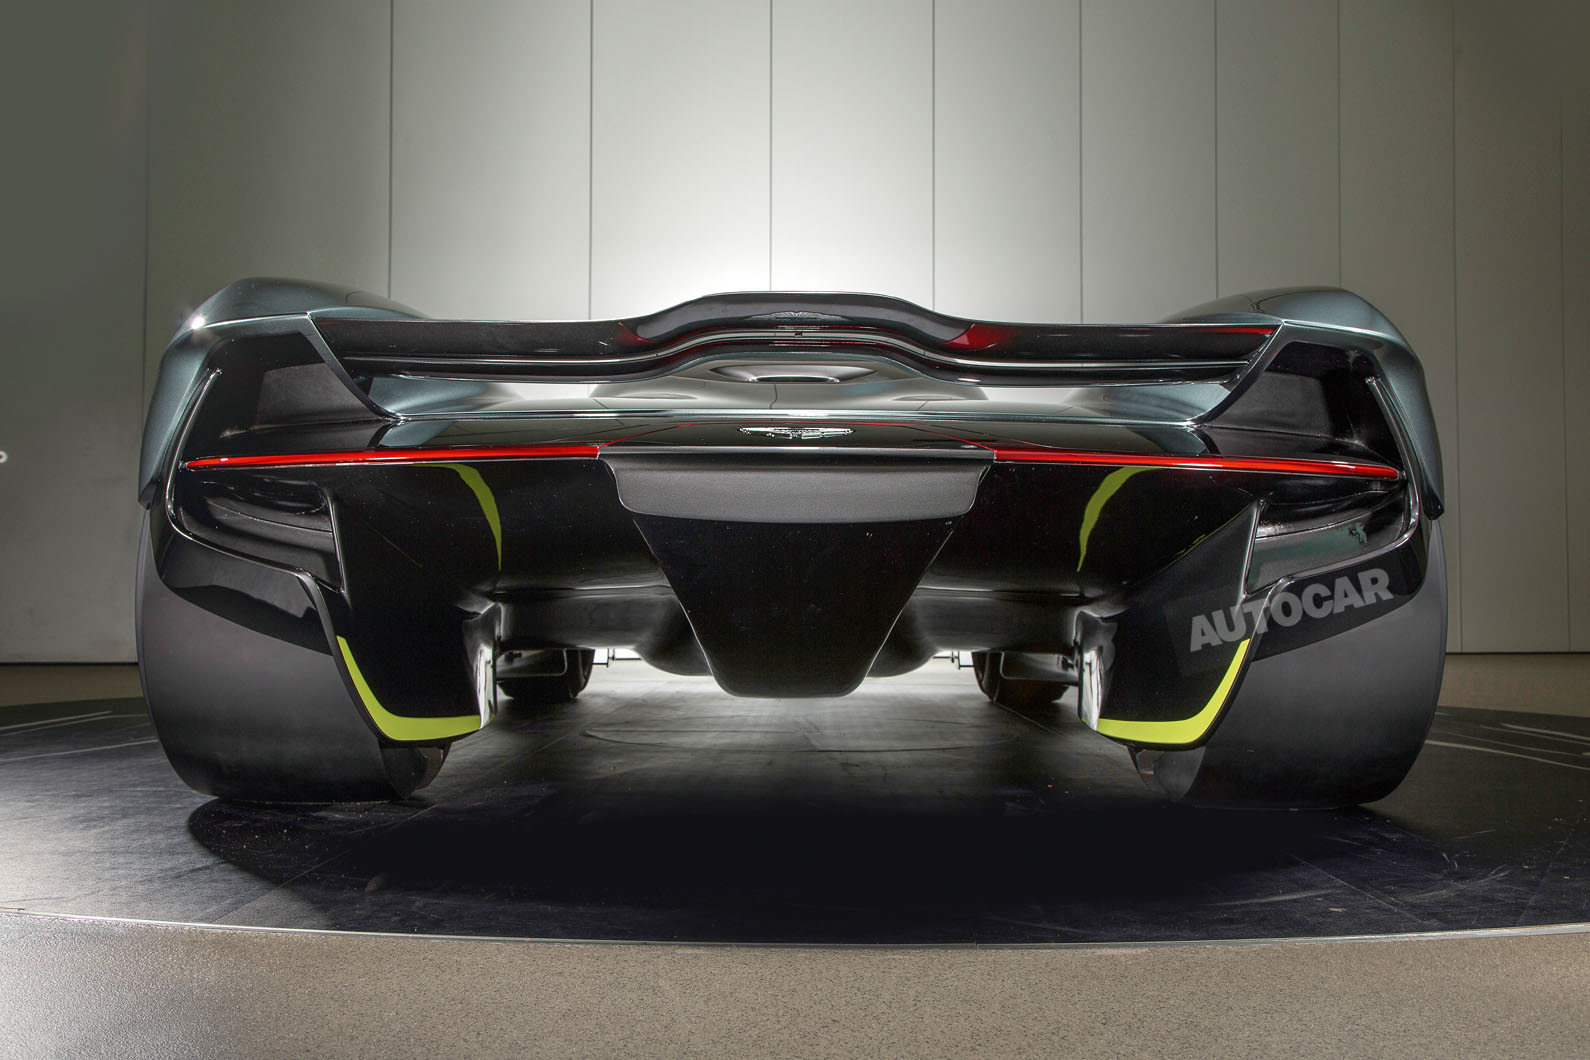 Aston Martin AM-RB 001 hypercar revealed - exclusive pictures ...